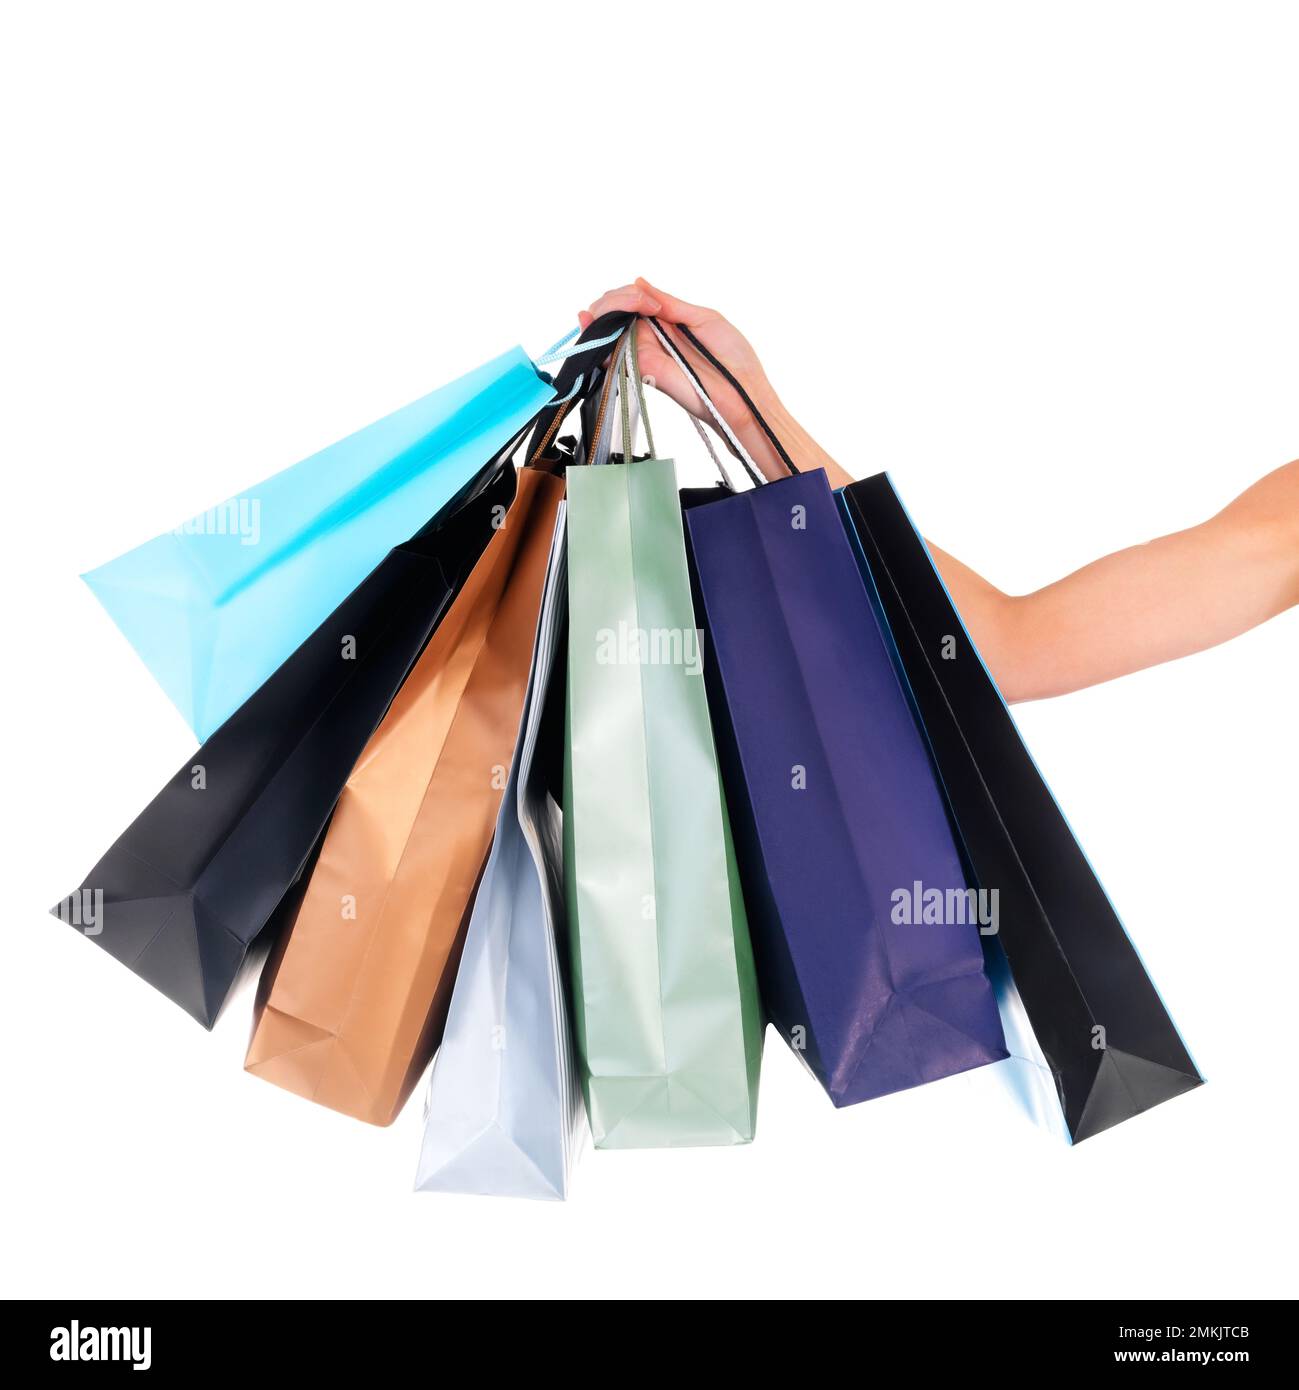 Bags of bargain buys. a young woman carrying shopping bags isolated on white. Stock Photo